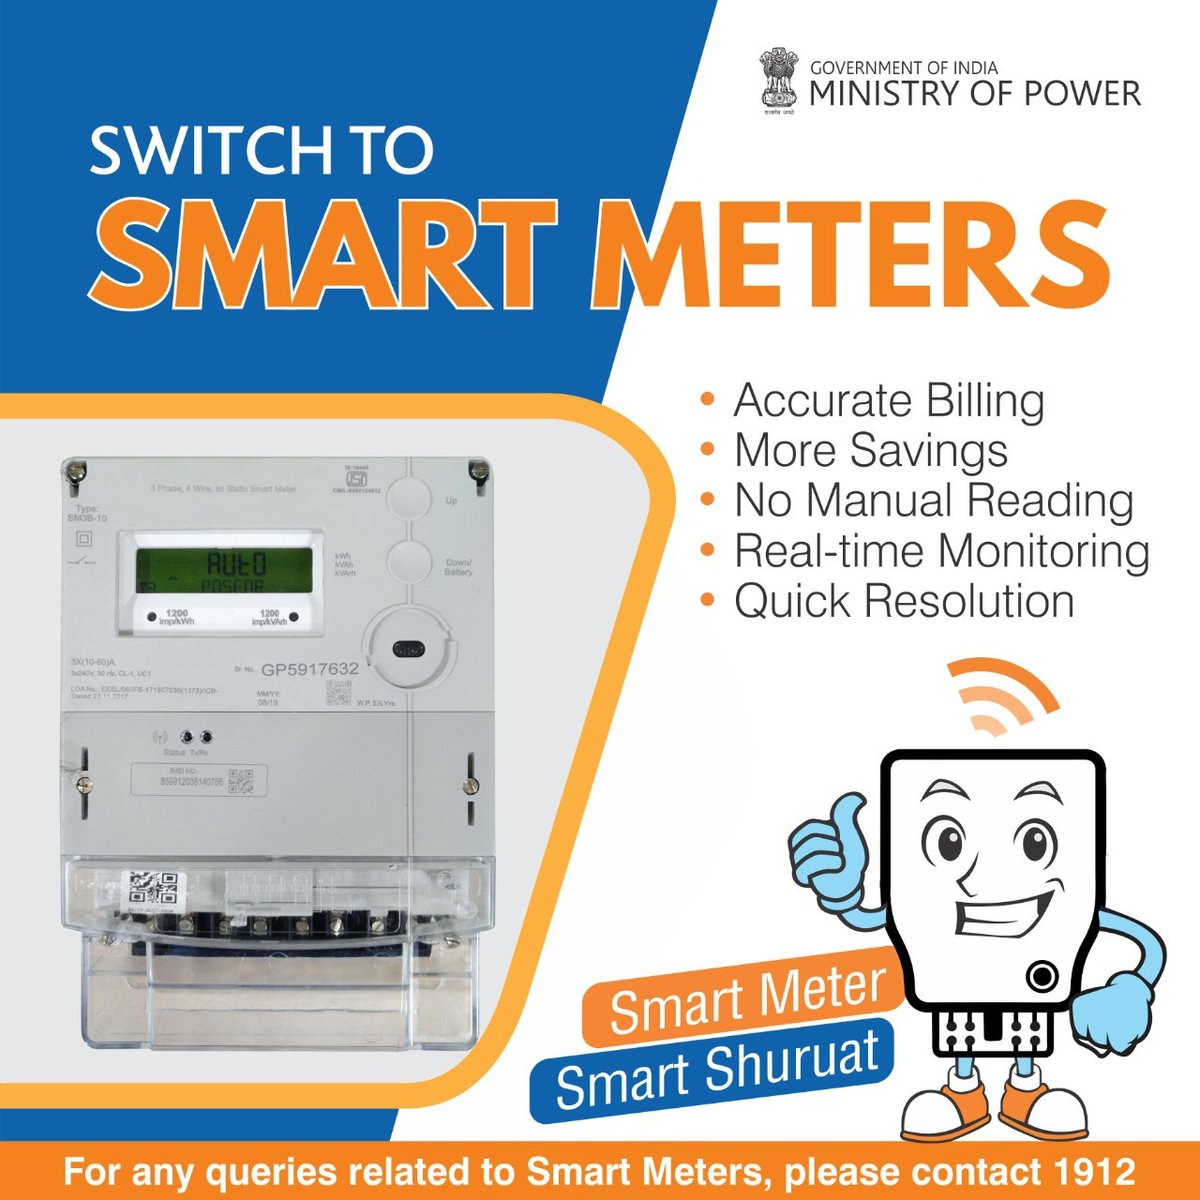 #SmartMeters are the new generation of electricity meters being rolled out across India. It can help you find ways to reduce your energy consumption and increase your savings. Reach out to your local power supplier for any queries related to smart meters #SmartMeterSmartShuruat